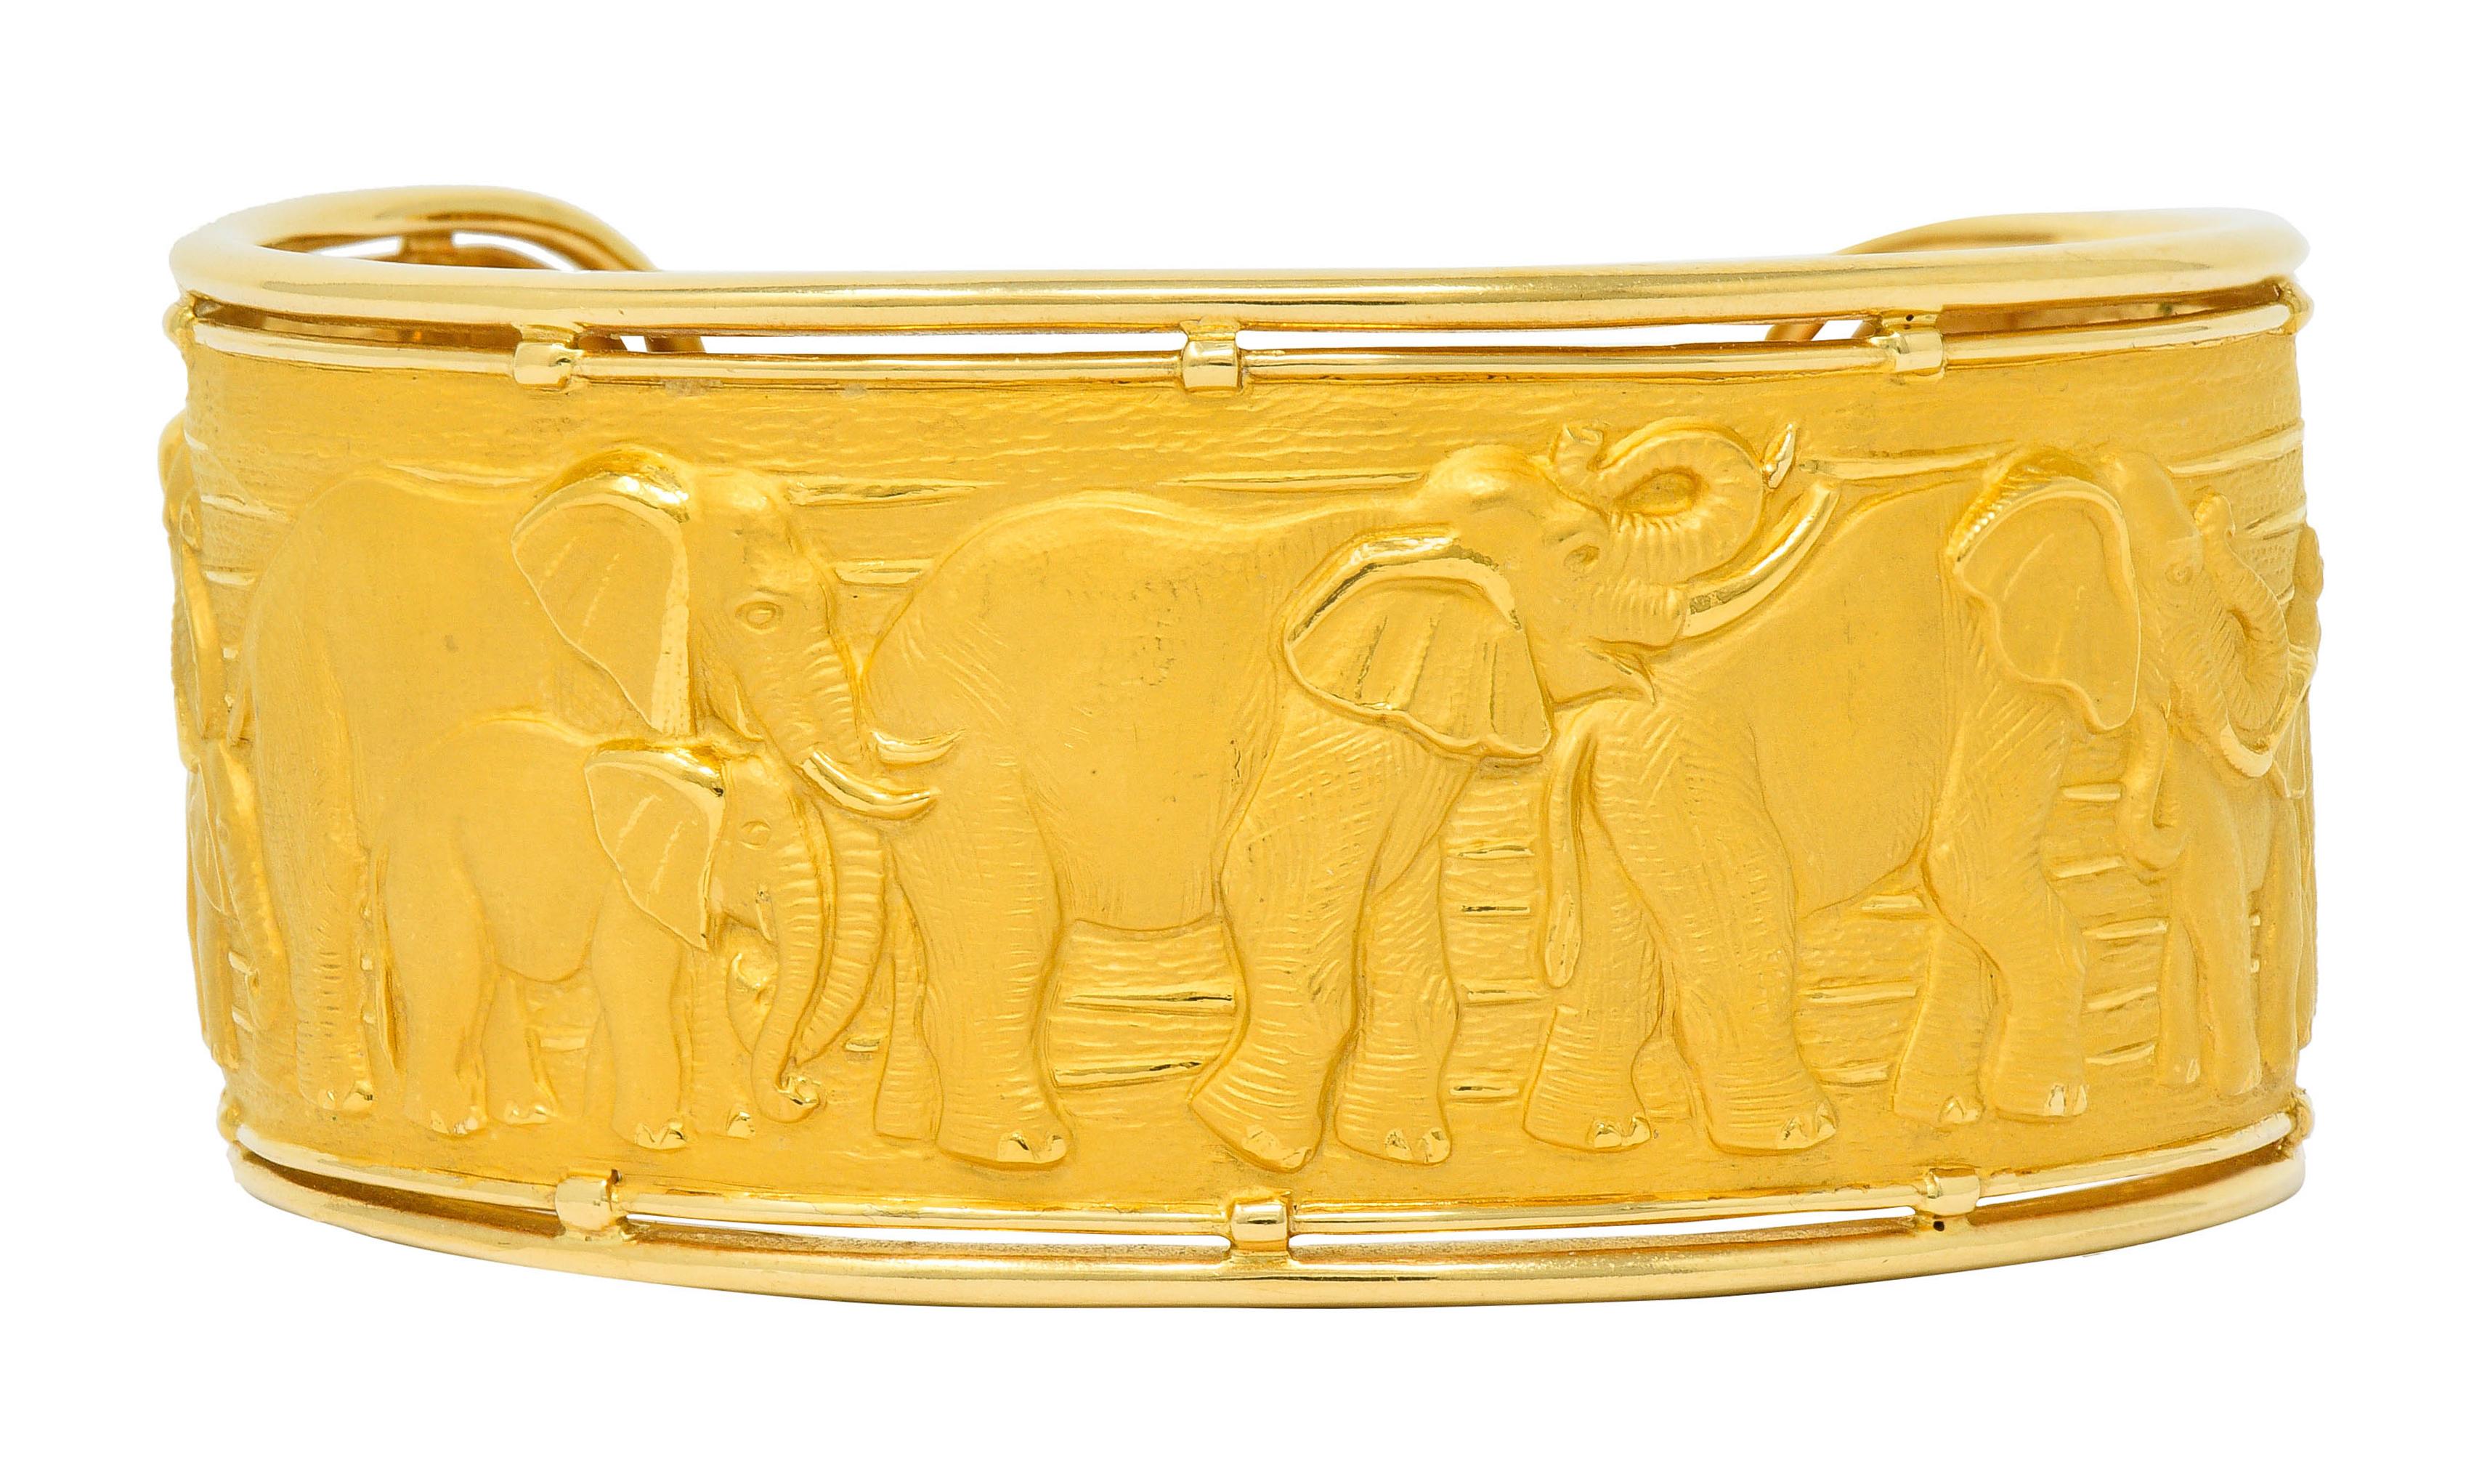 Wide cuff bracelet featuring polished edges contrasting highly rendered repoussè

Depicting a family of traversing elephants with high polished details against finely textured matte gold

Stamped 750 for 18 karat gold

Numbered with maker's mark for